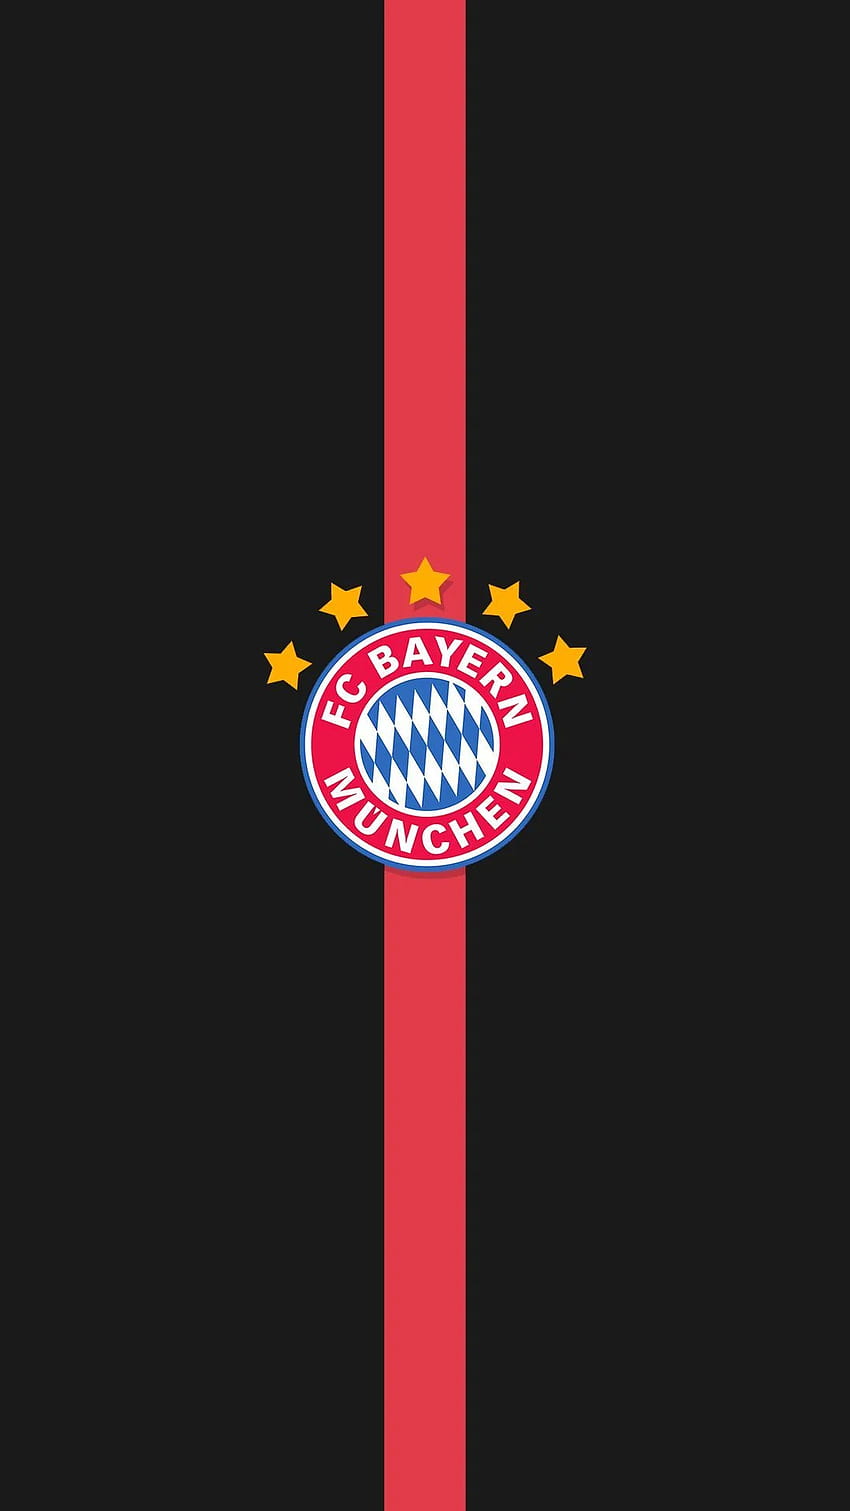 The logo of the German Bundesliga football club Bayern Munchen on a red  background 2K wallpaper download